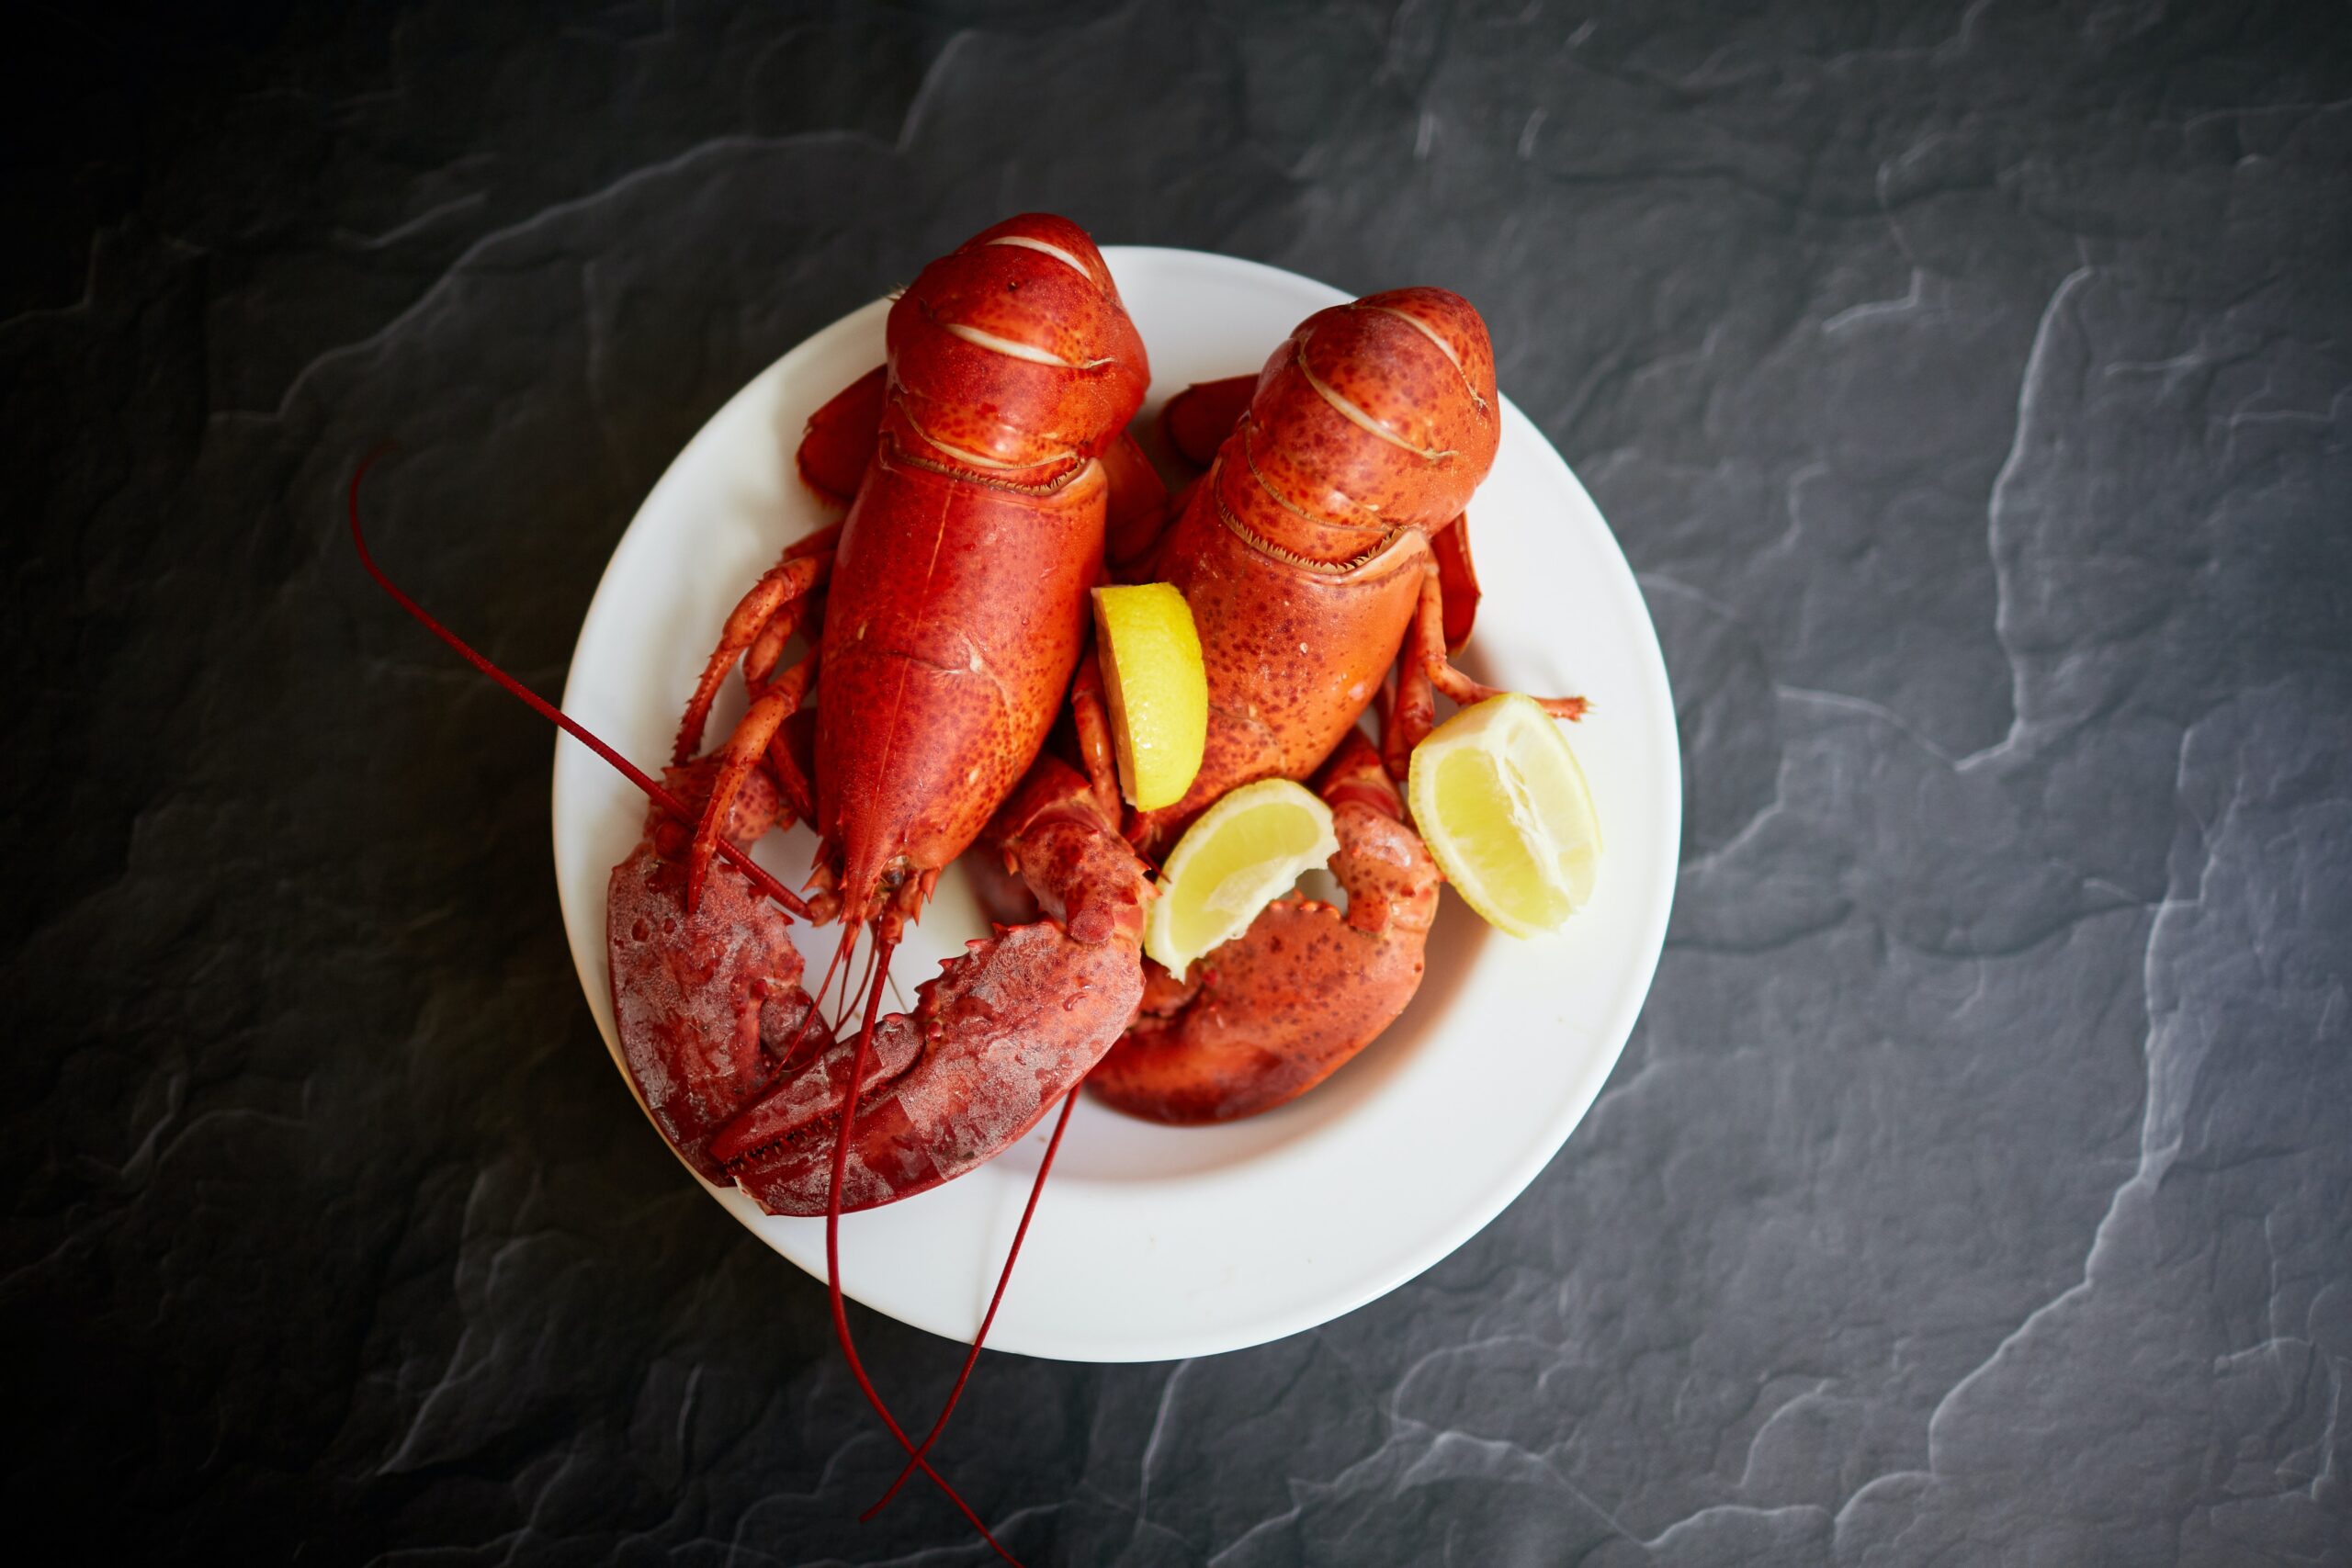 What Does Eating Lobster Have to do with Church Attendence?